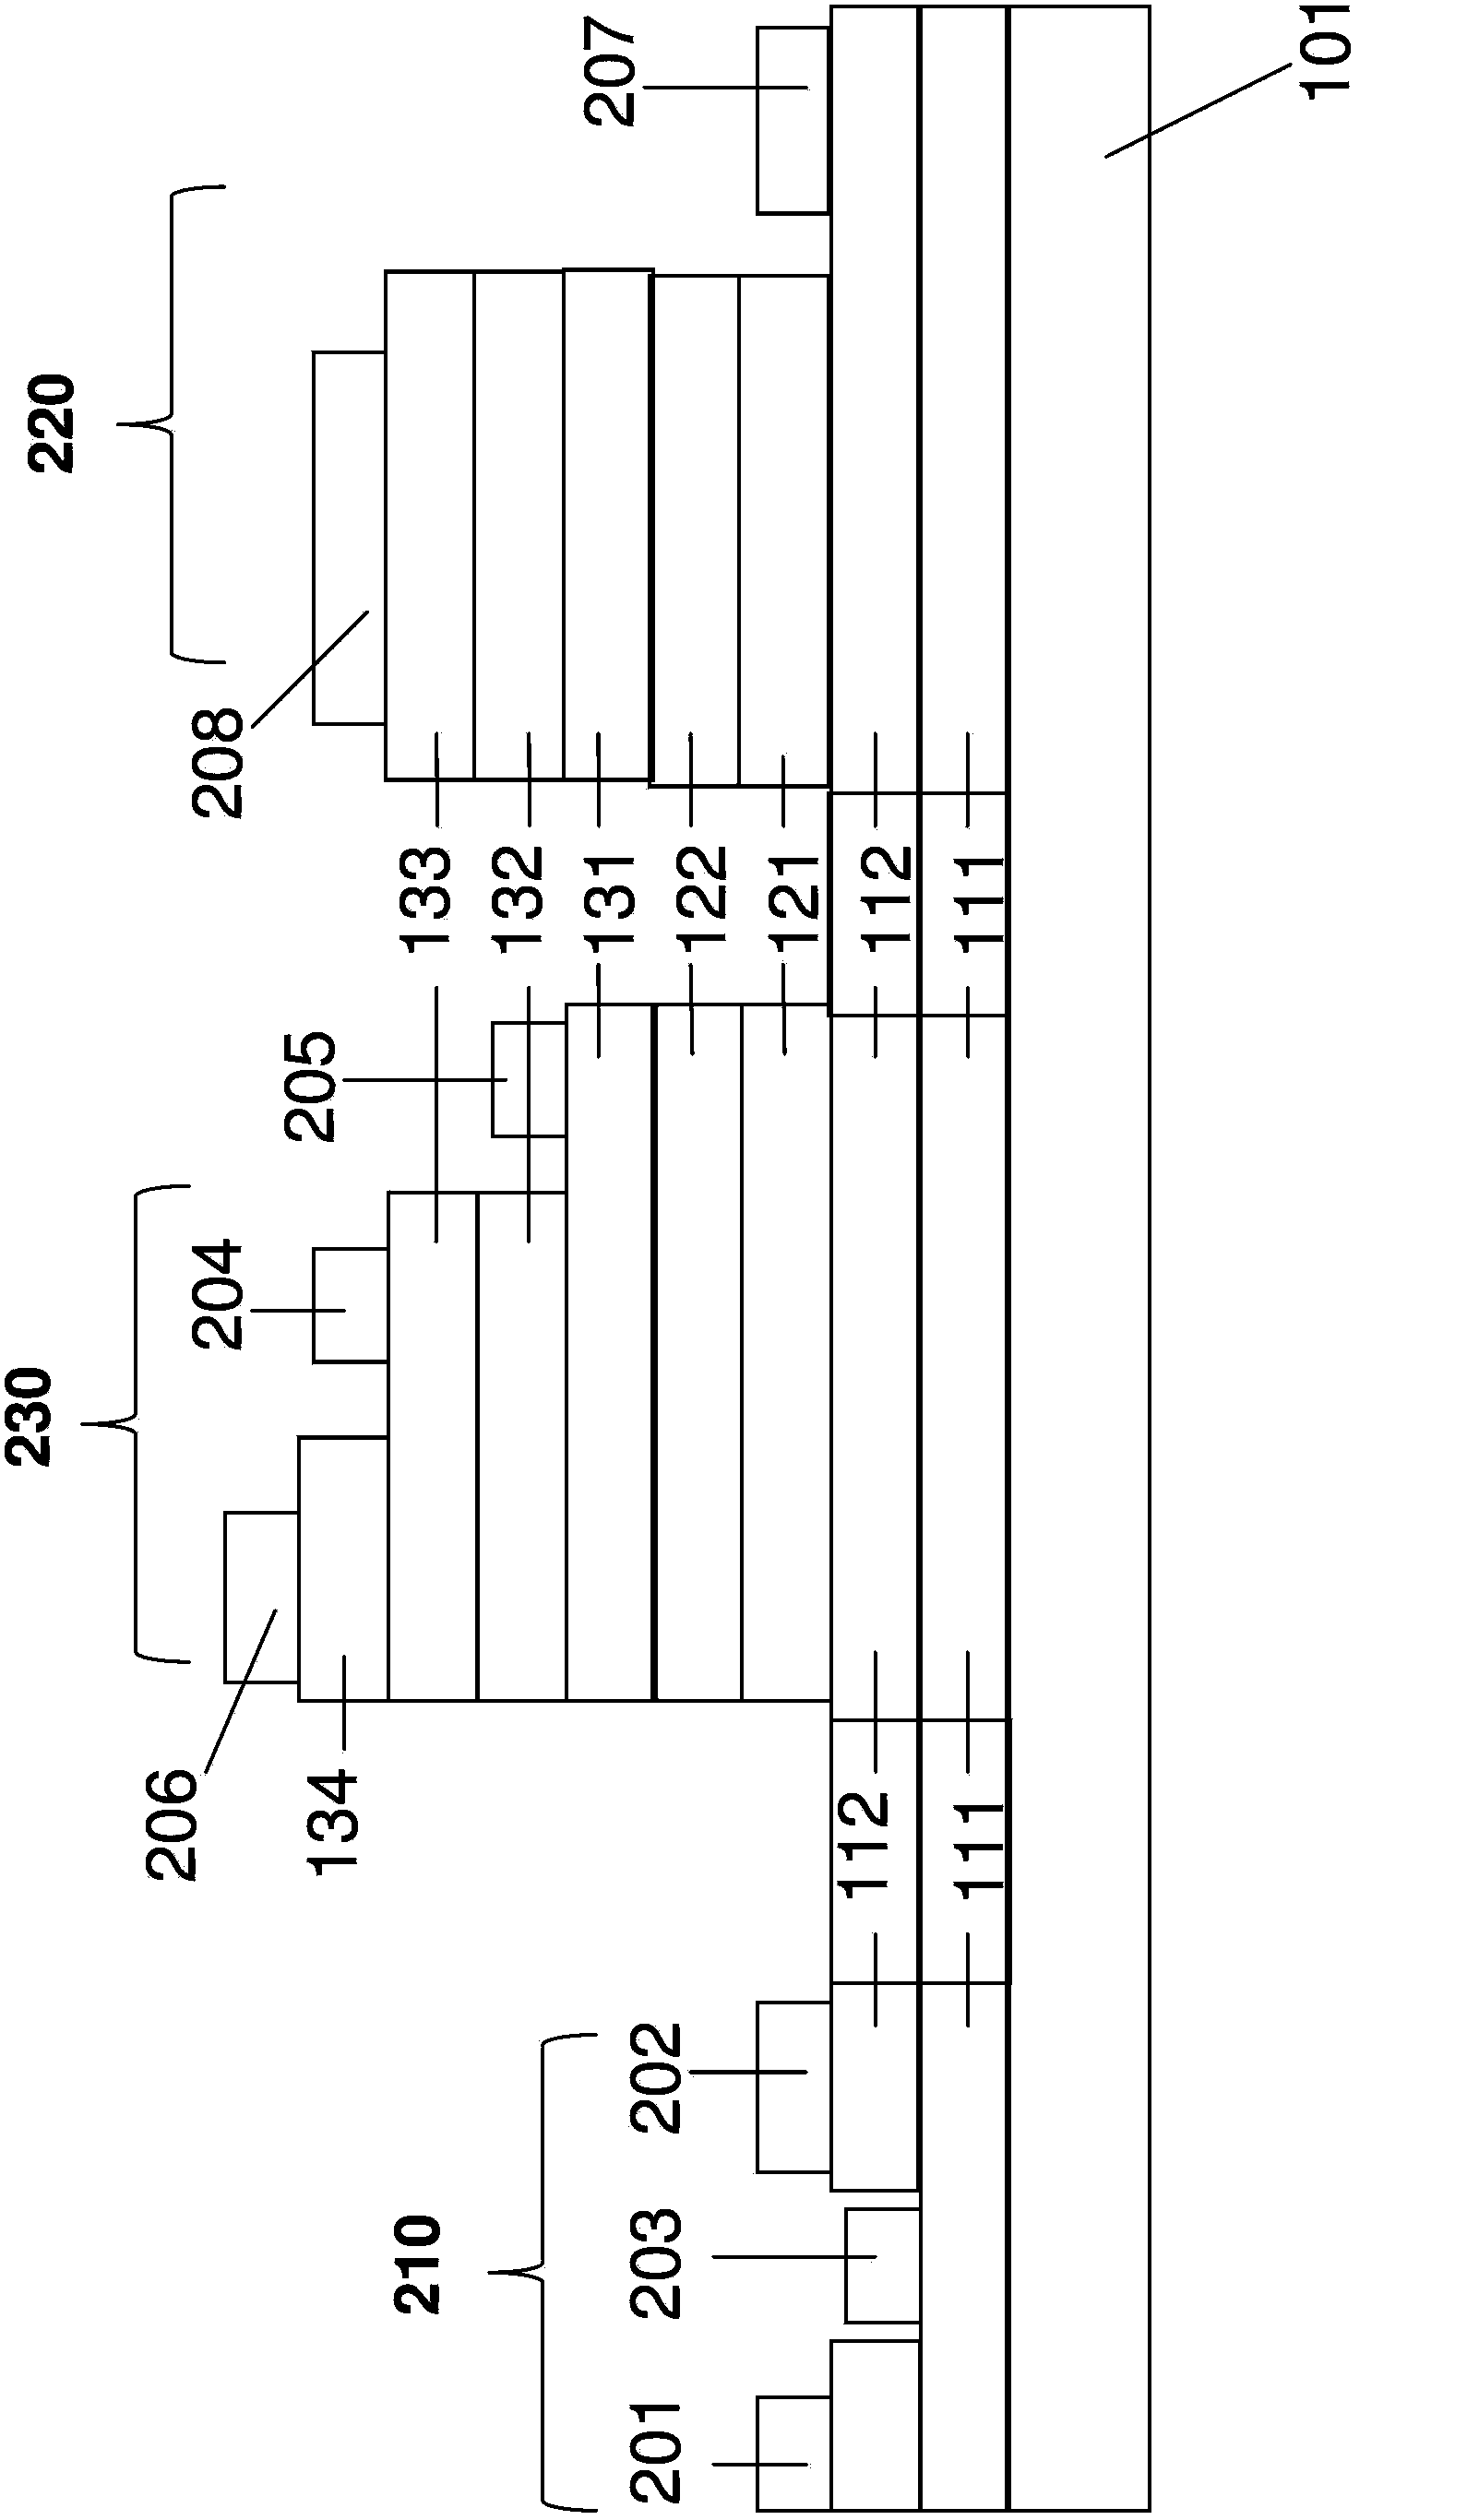 Compound semiconductor wafer structure